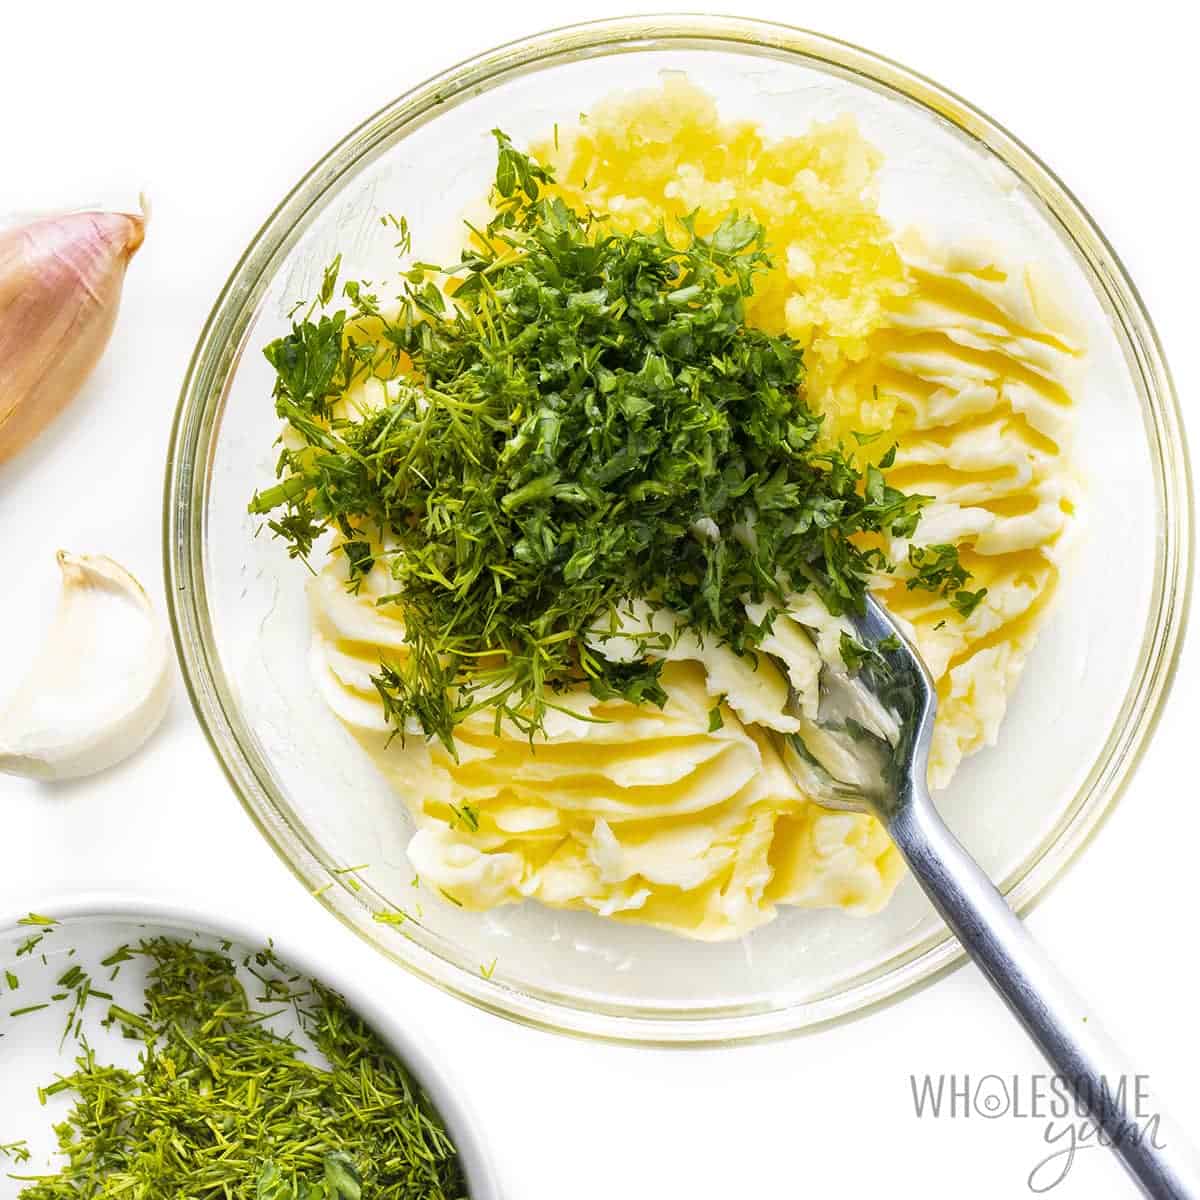 Fresh herbs in mashed butter